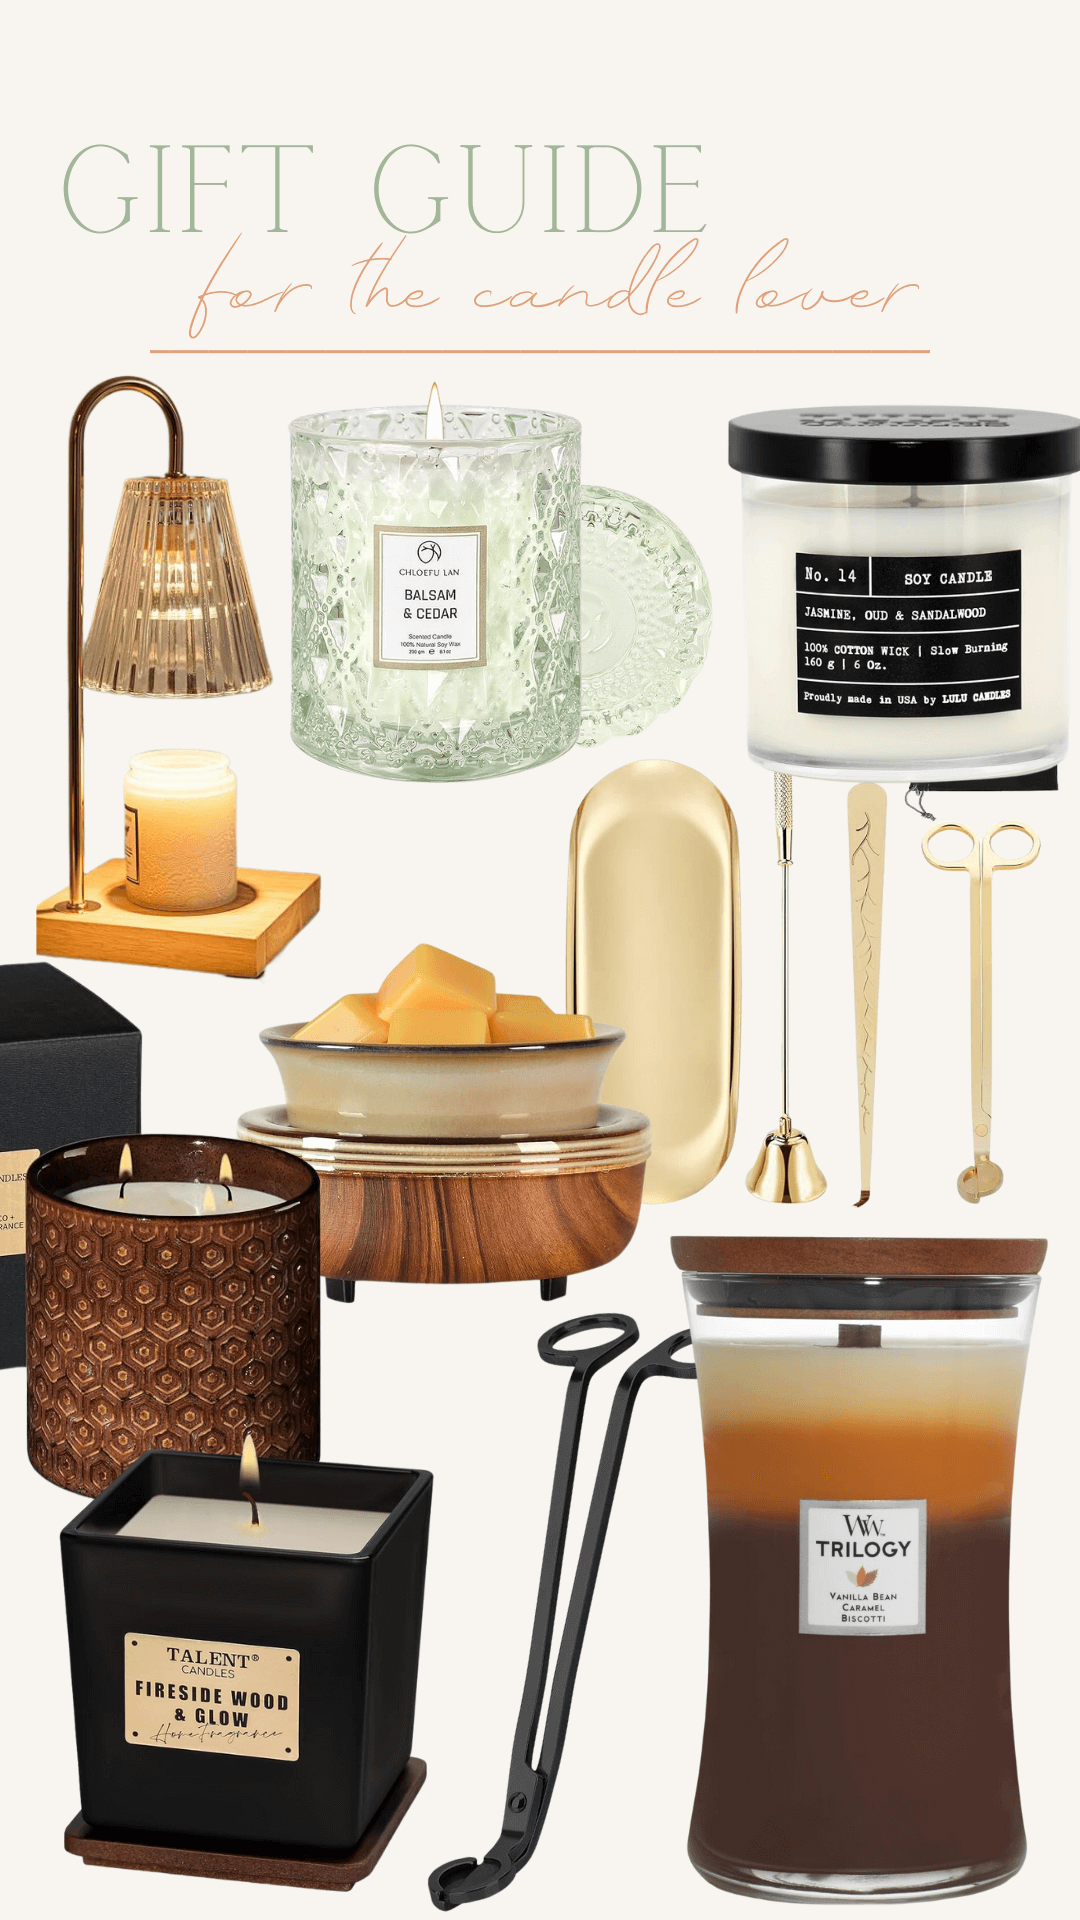 Candles and accessories for the candle lovers.